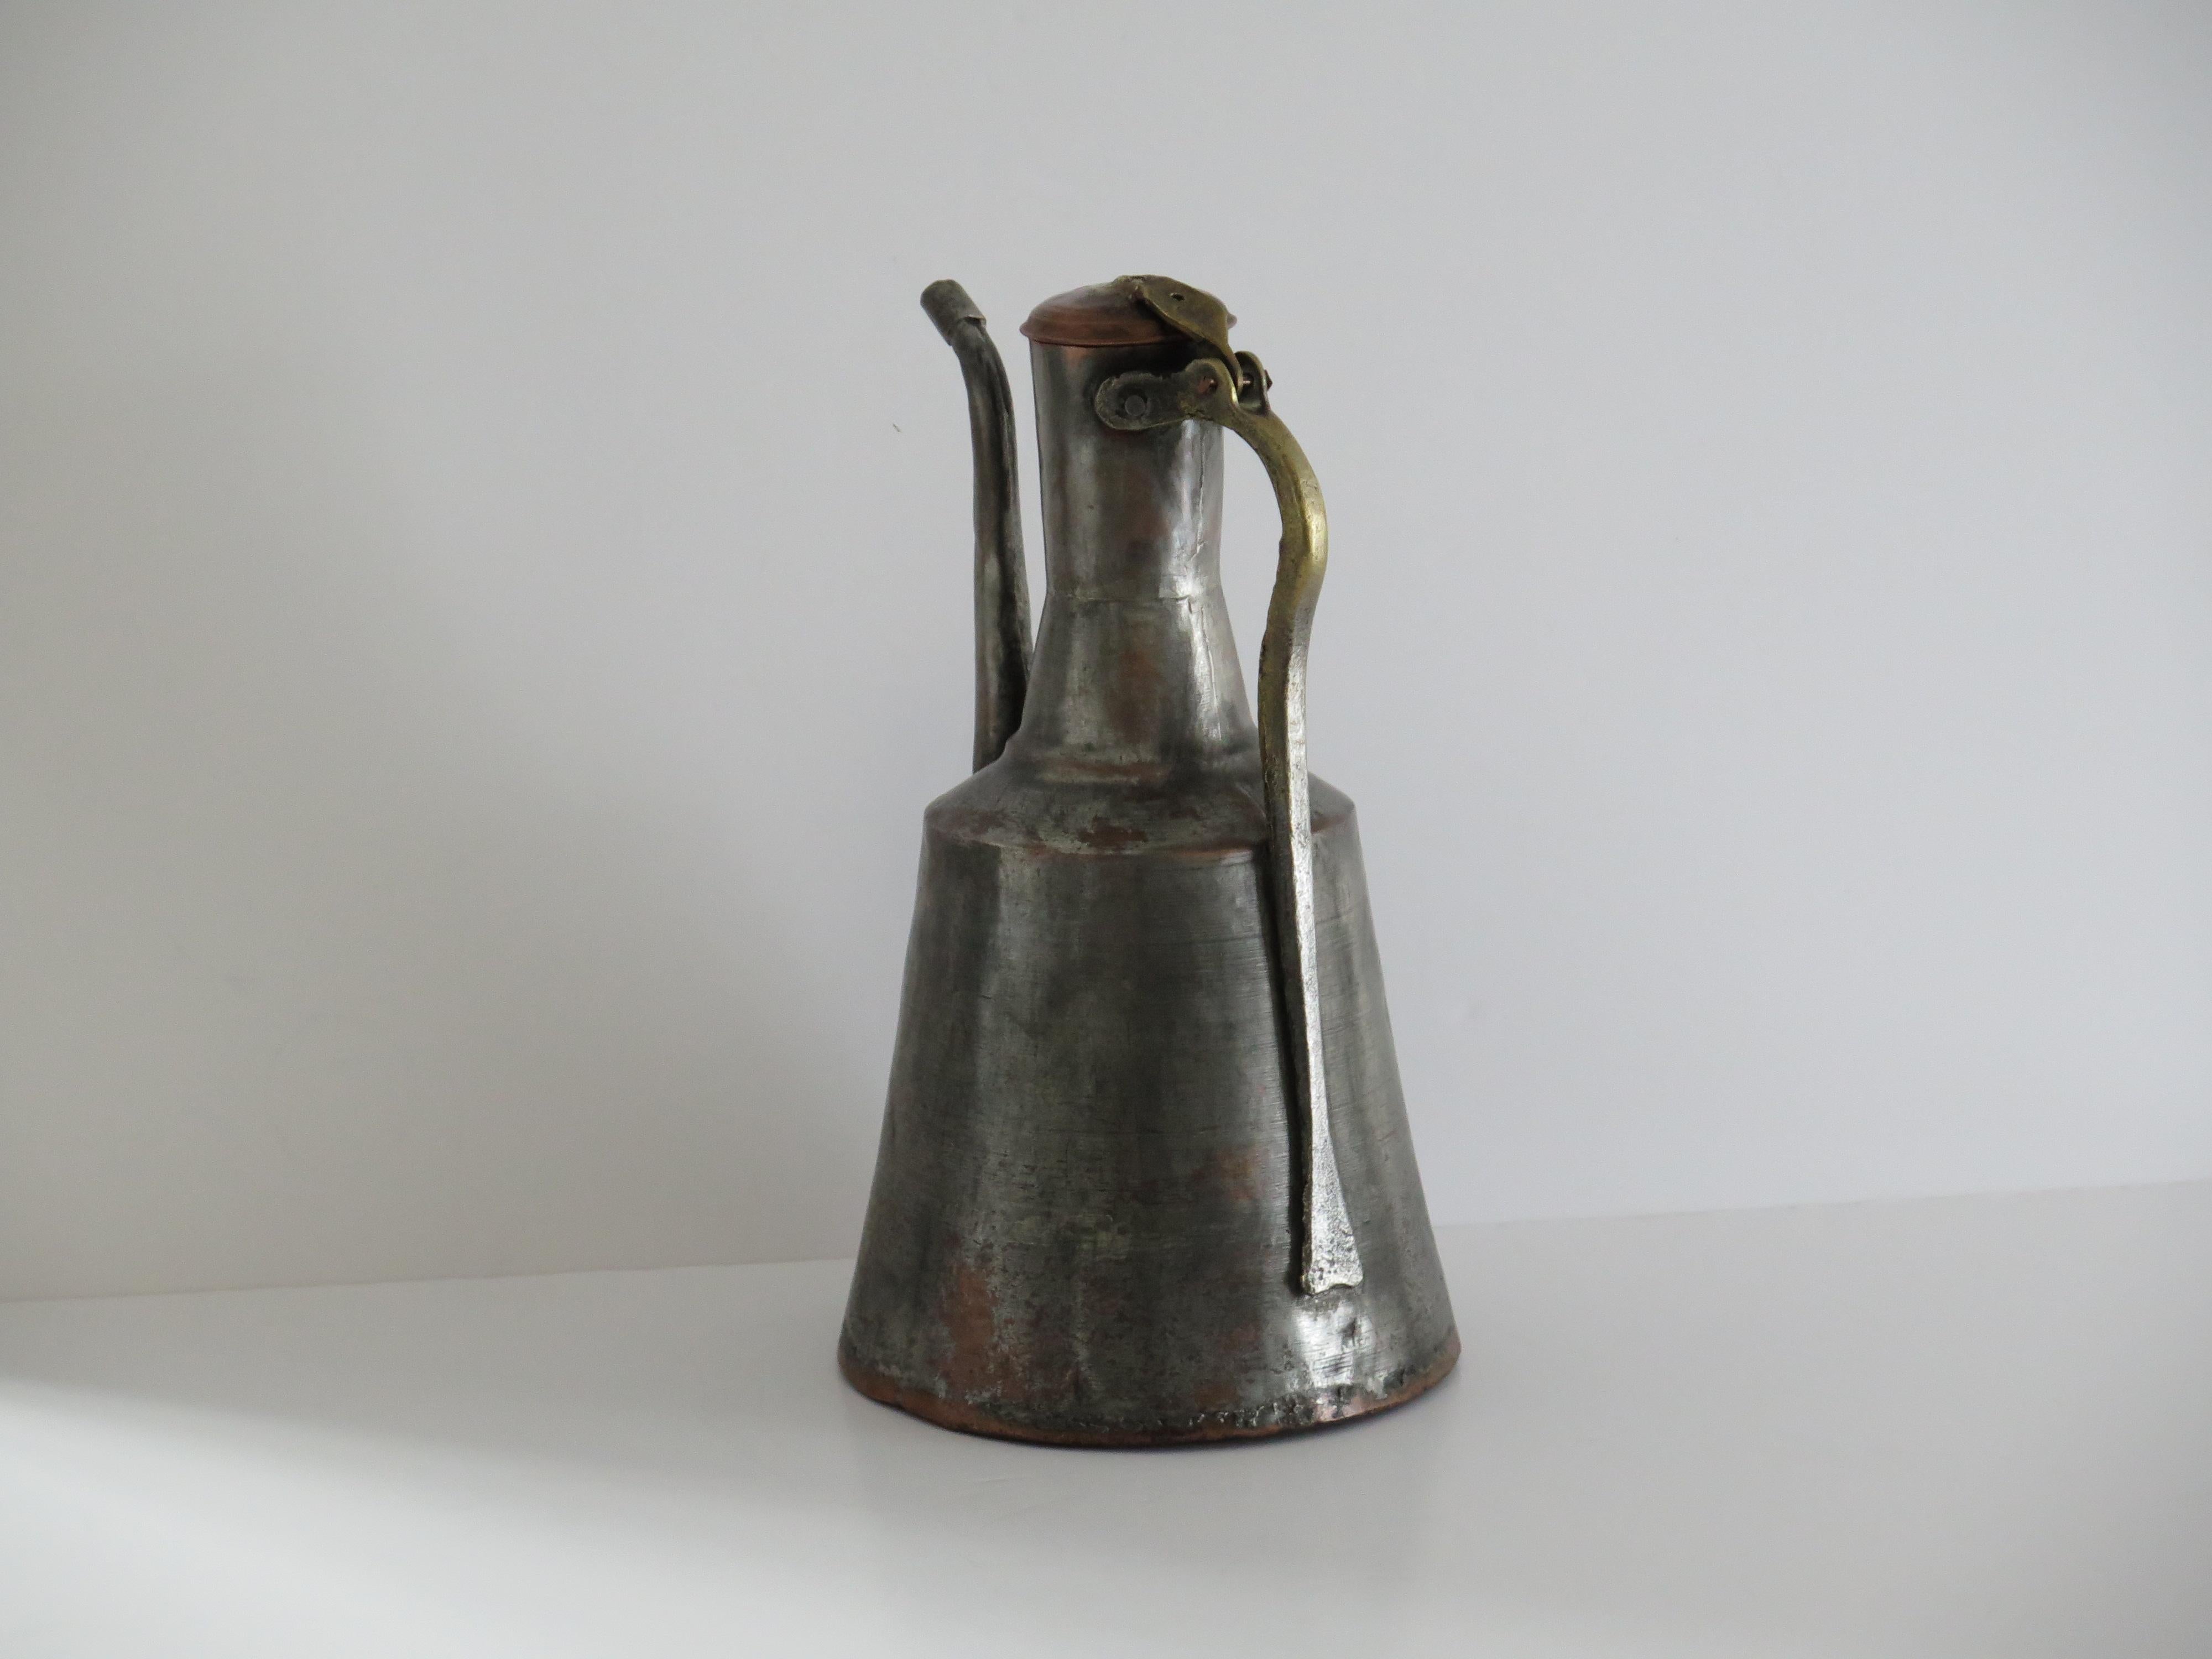 Ewer or Pitcher tinned Copper Turkish / Middle Eastern, Early 19th Century For Sale 8